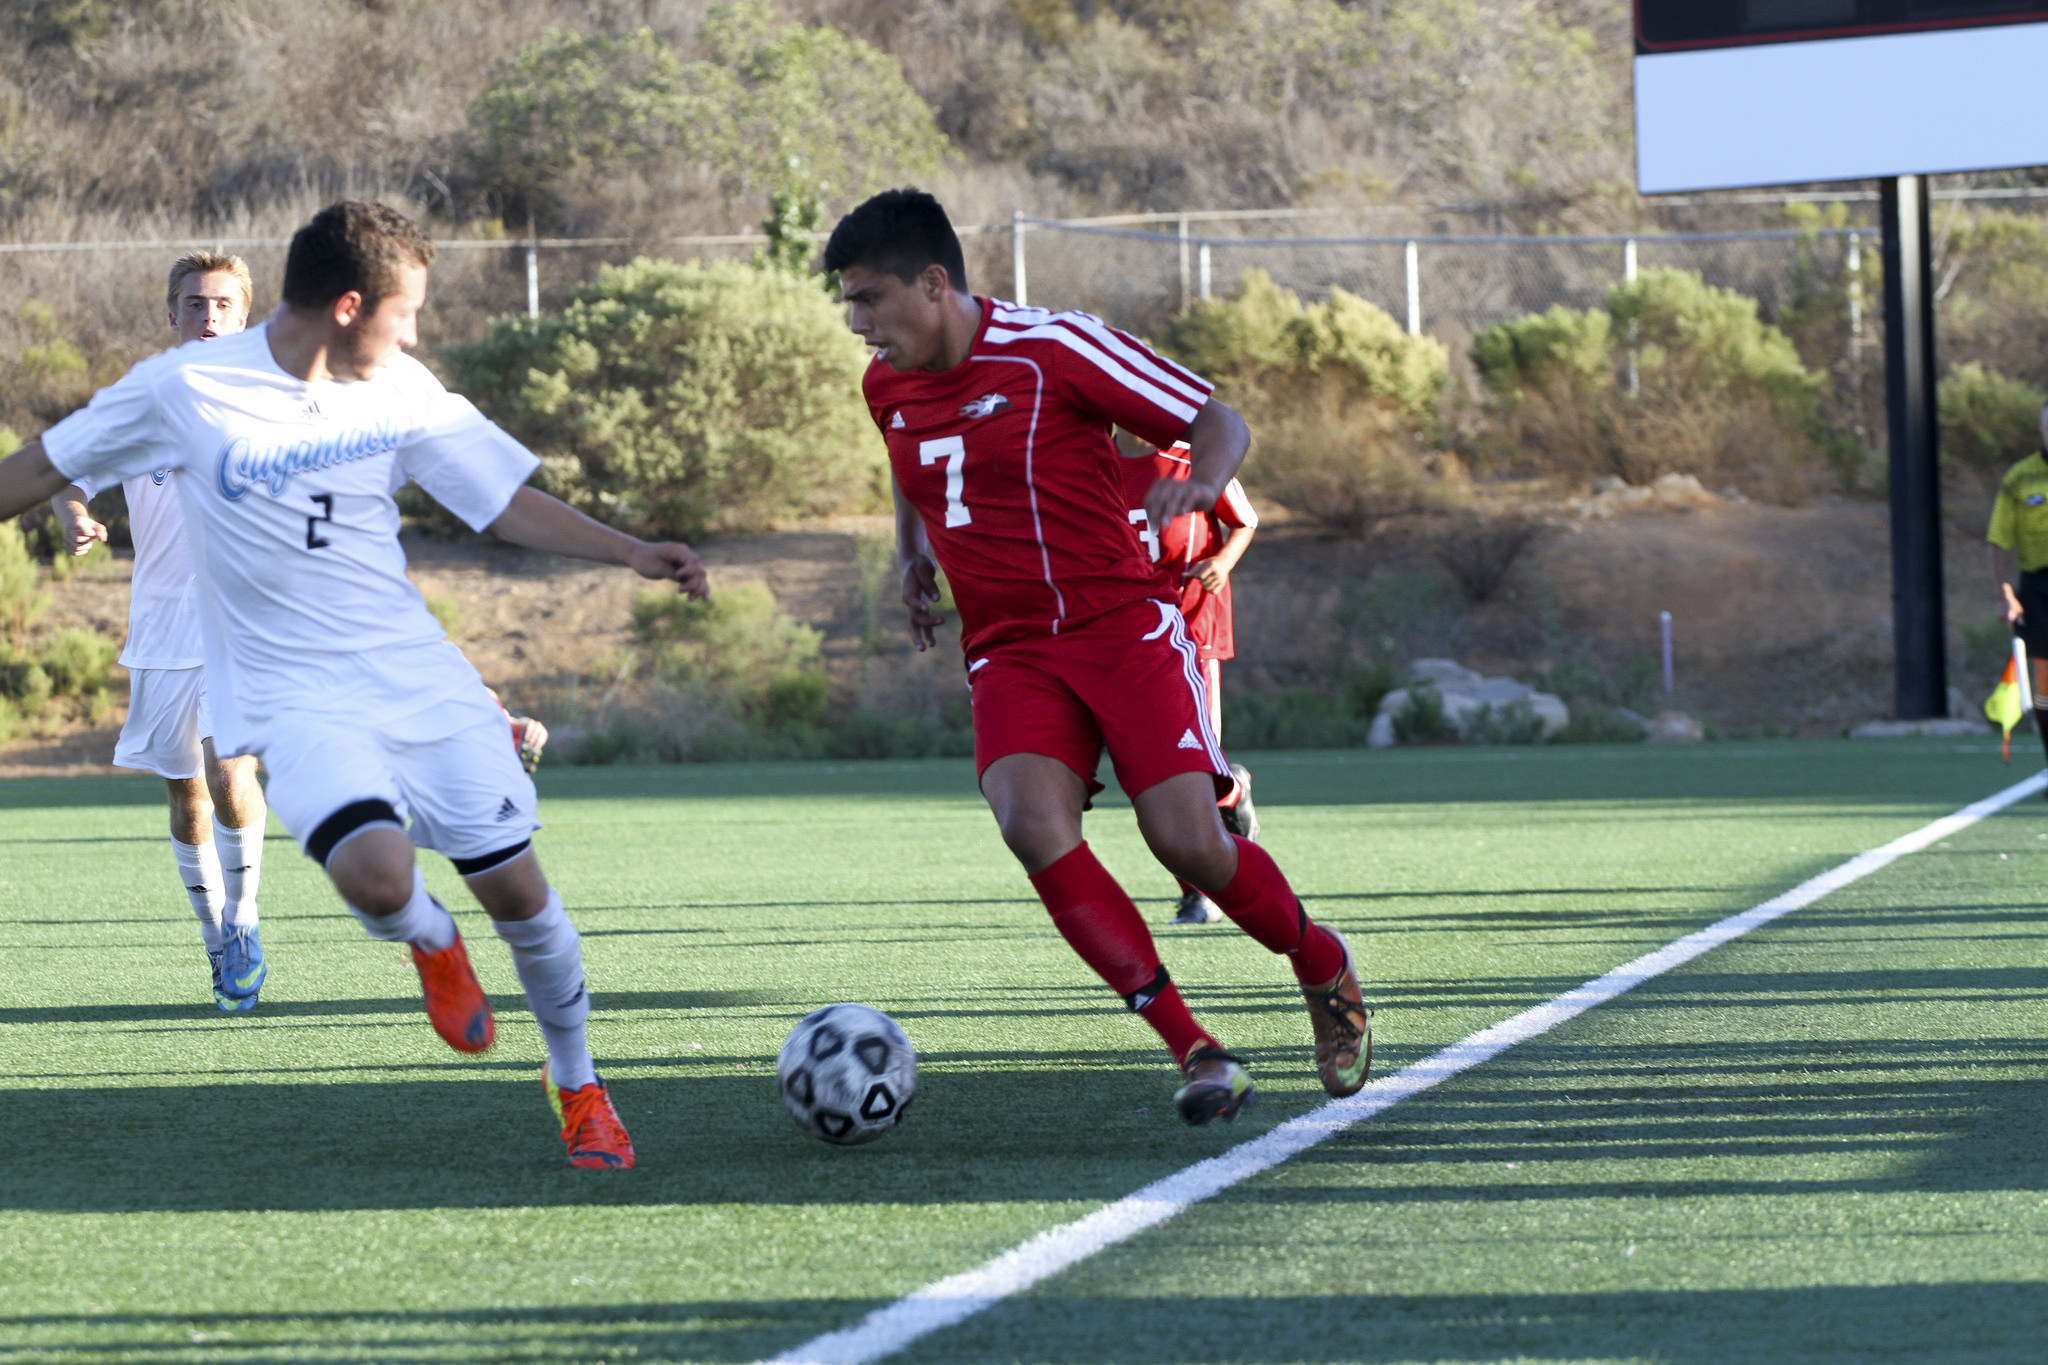 Palomar's midfielder Adrian Agraz (7) battles for the ball during a game against Cuyamaca on Oct. 24, 2014 at Minkoff Field in San Marcos, Calif. Comet's 2-0 loss to Cuyamaca. (Photo courtesy of Marcela Alauie)